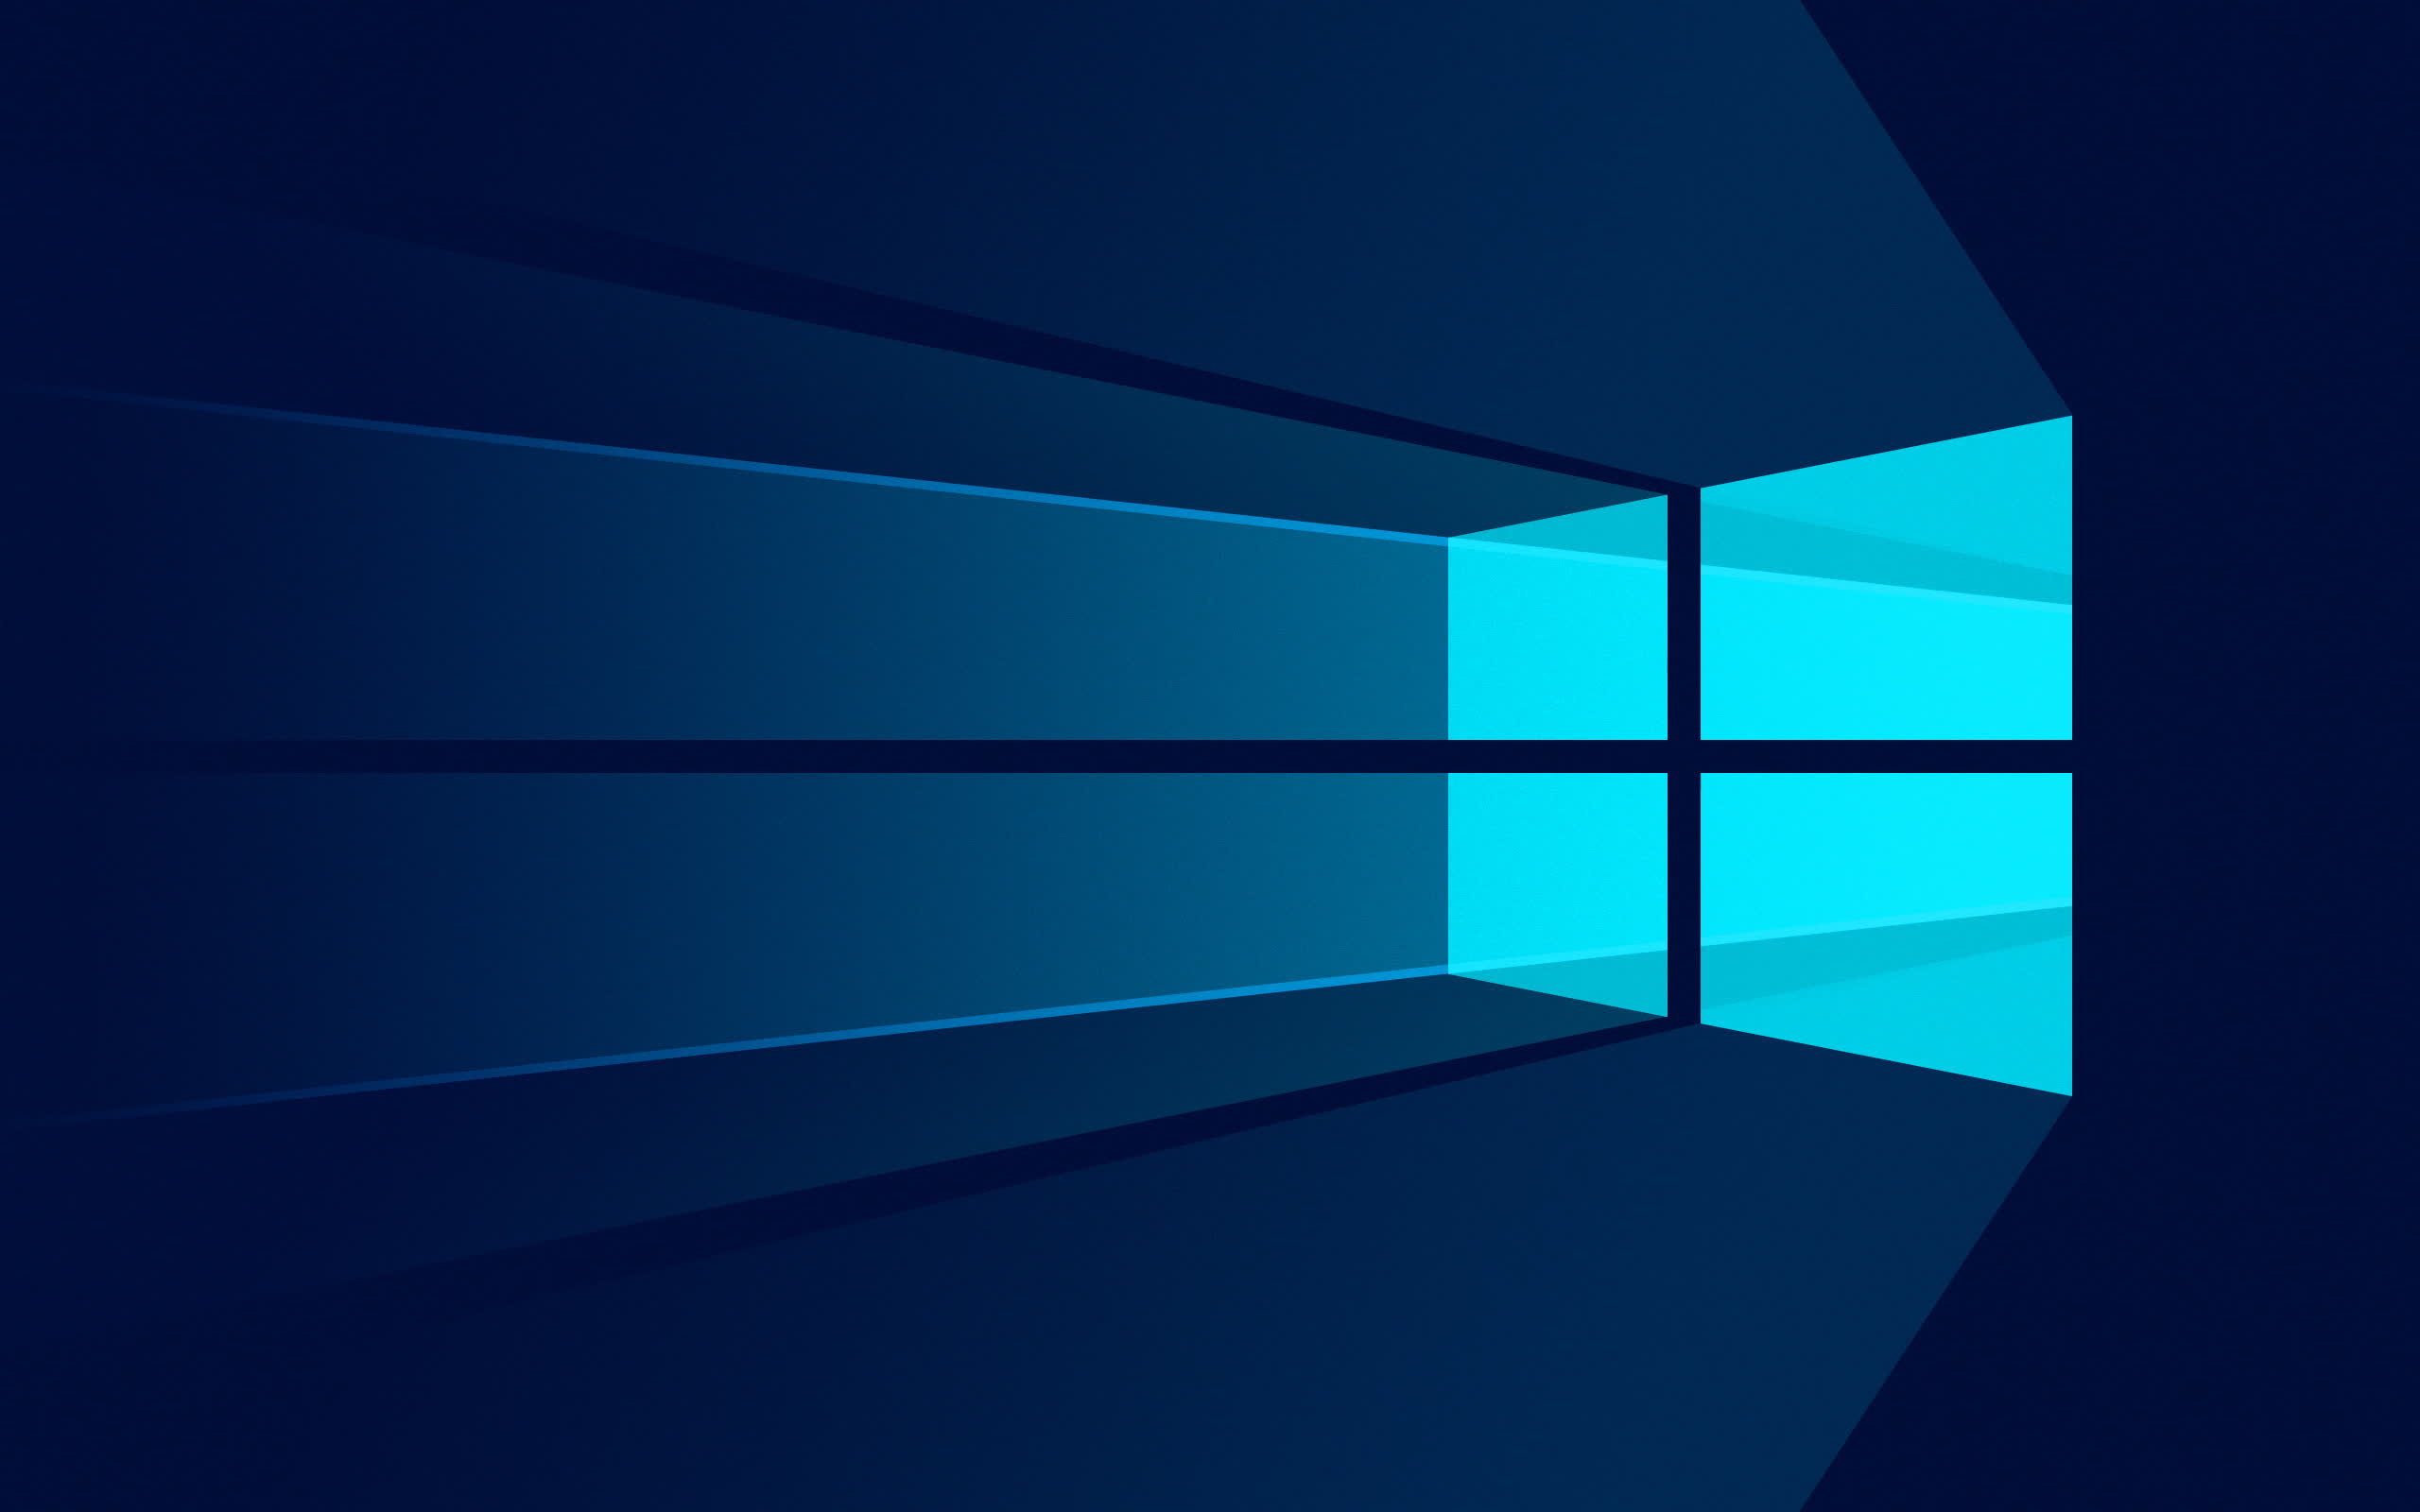 AI-powered Windows 12 is on its way, but Windows 10 is still king